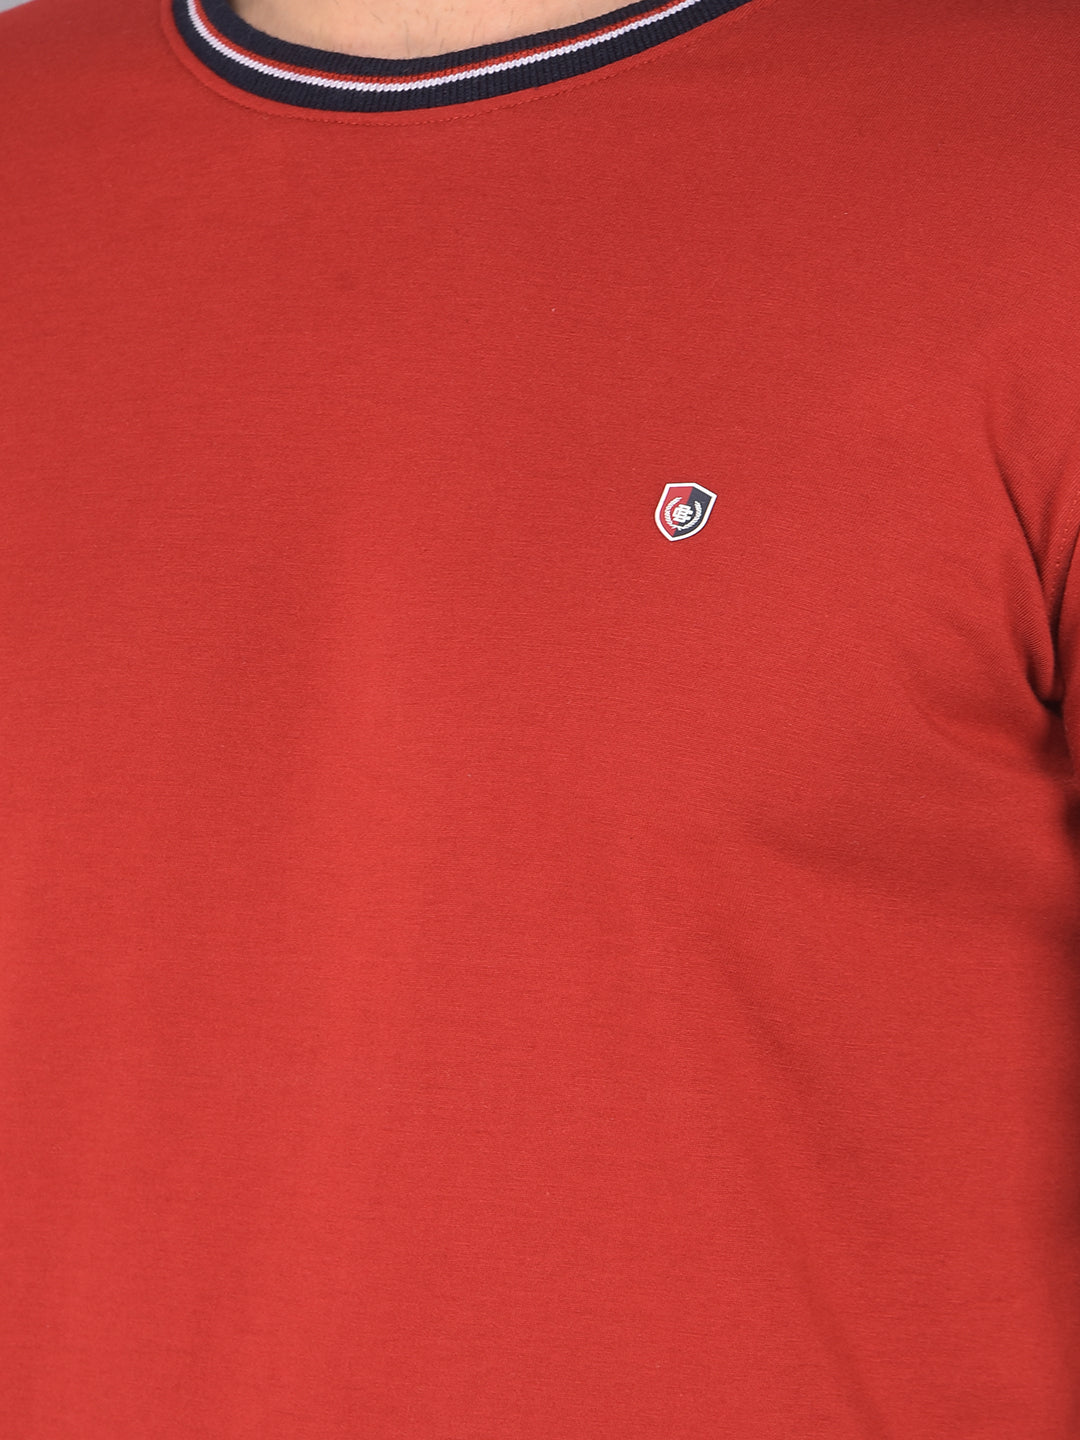 COBB SOLID RUST RED ROUND NECK T-SHIRT